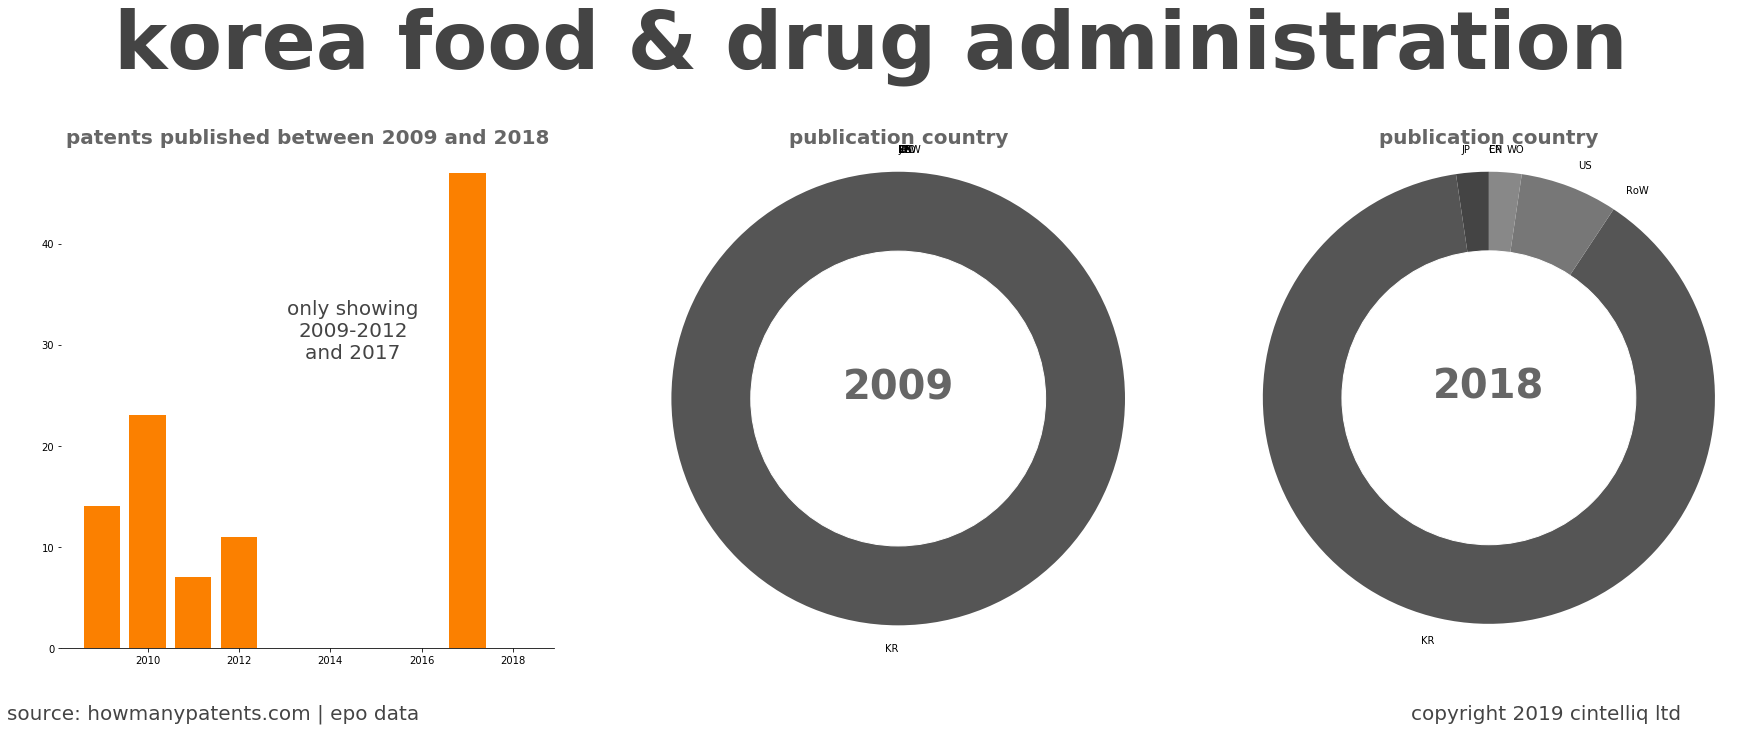 summary of patents for Korea Food & Drug Administration